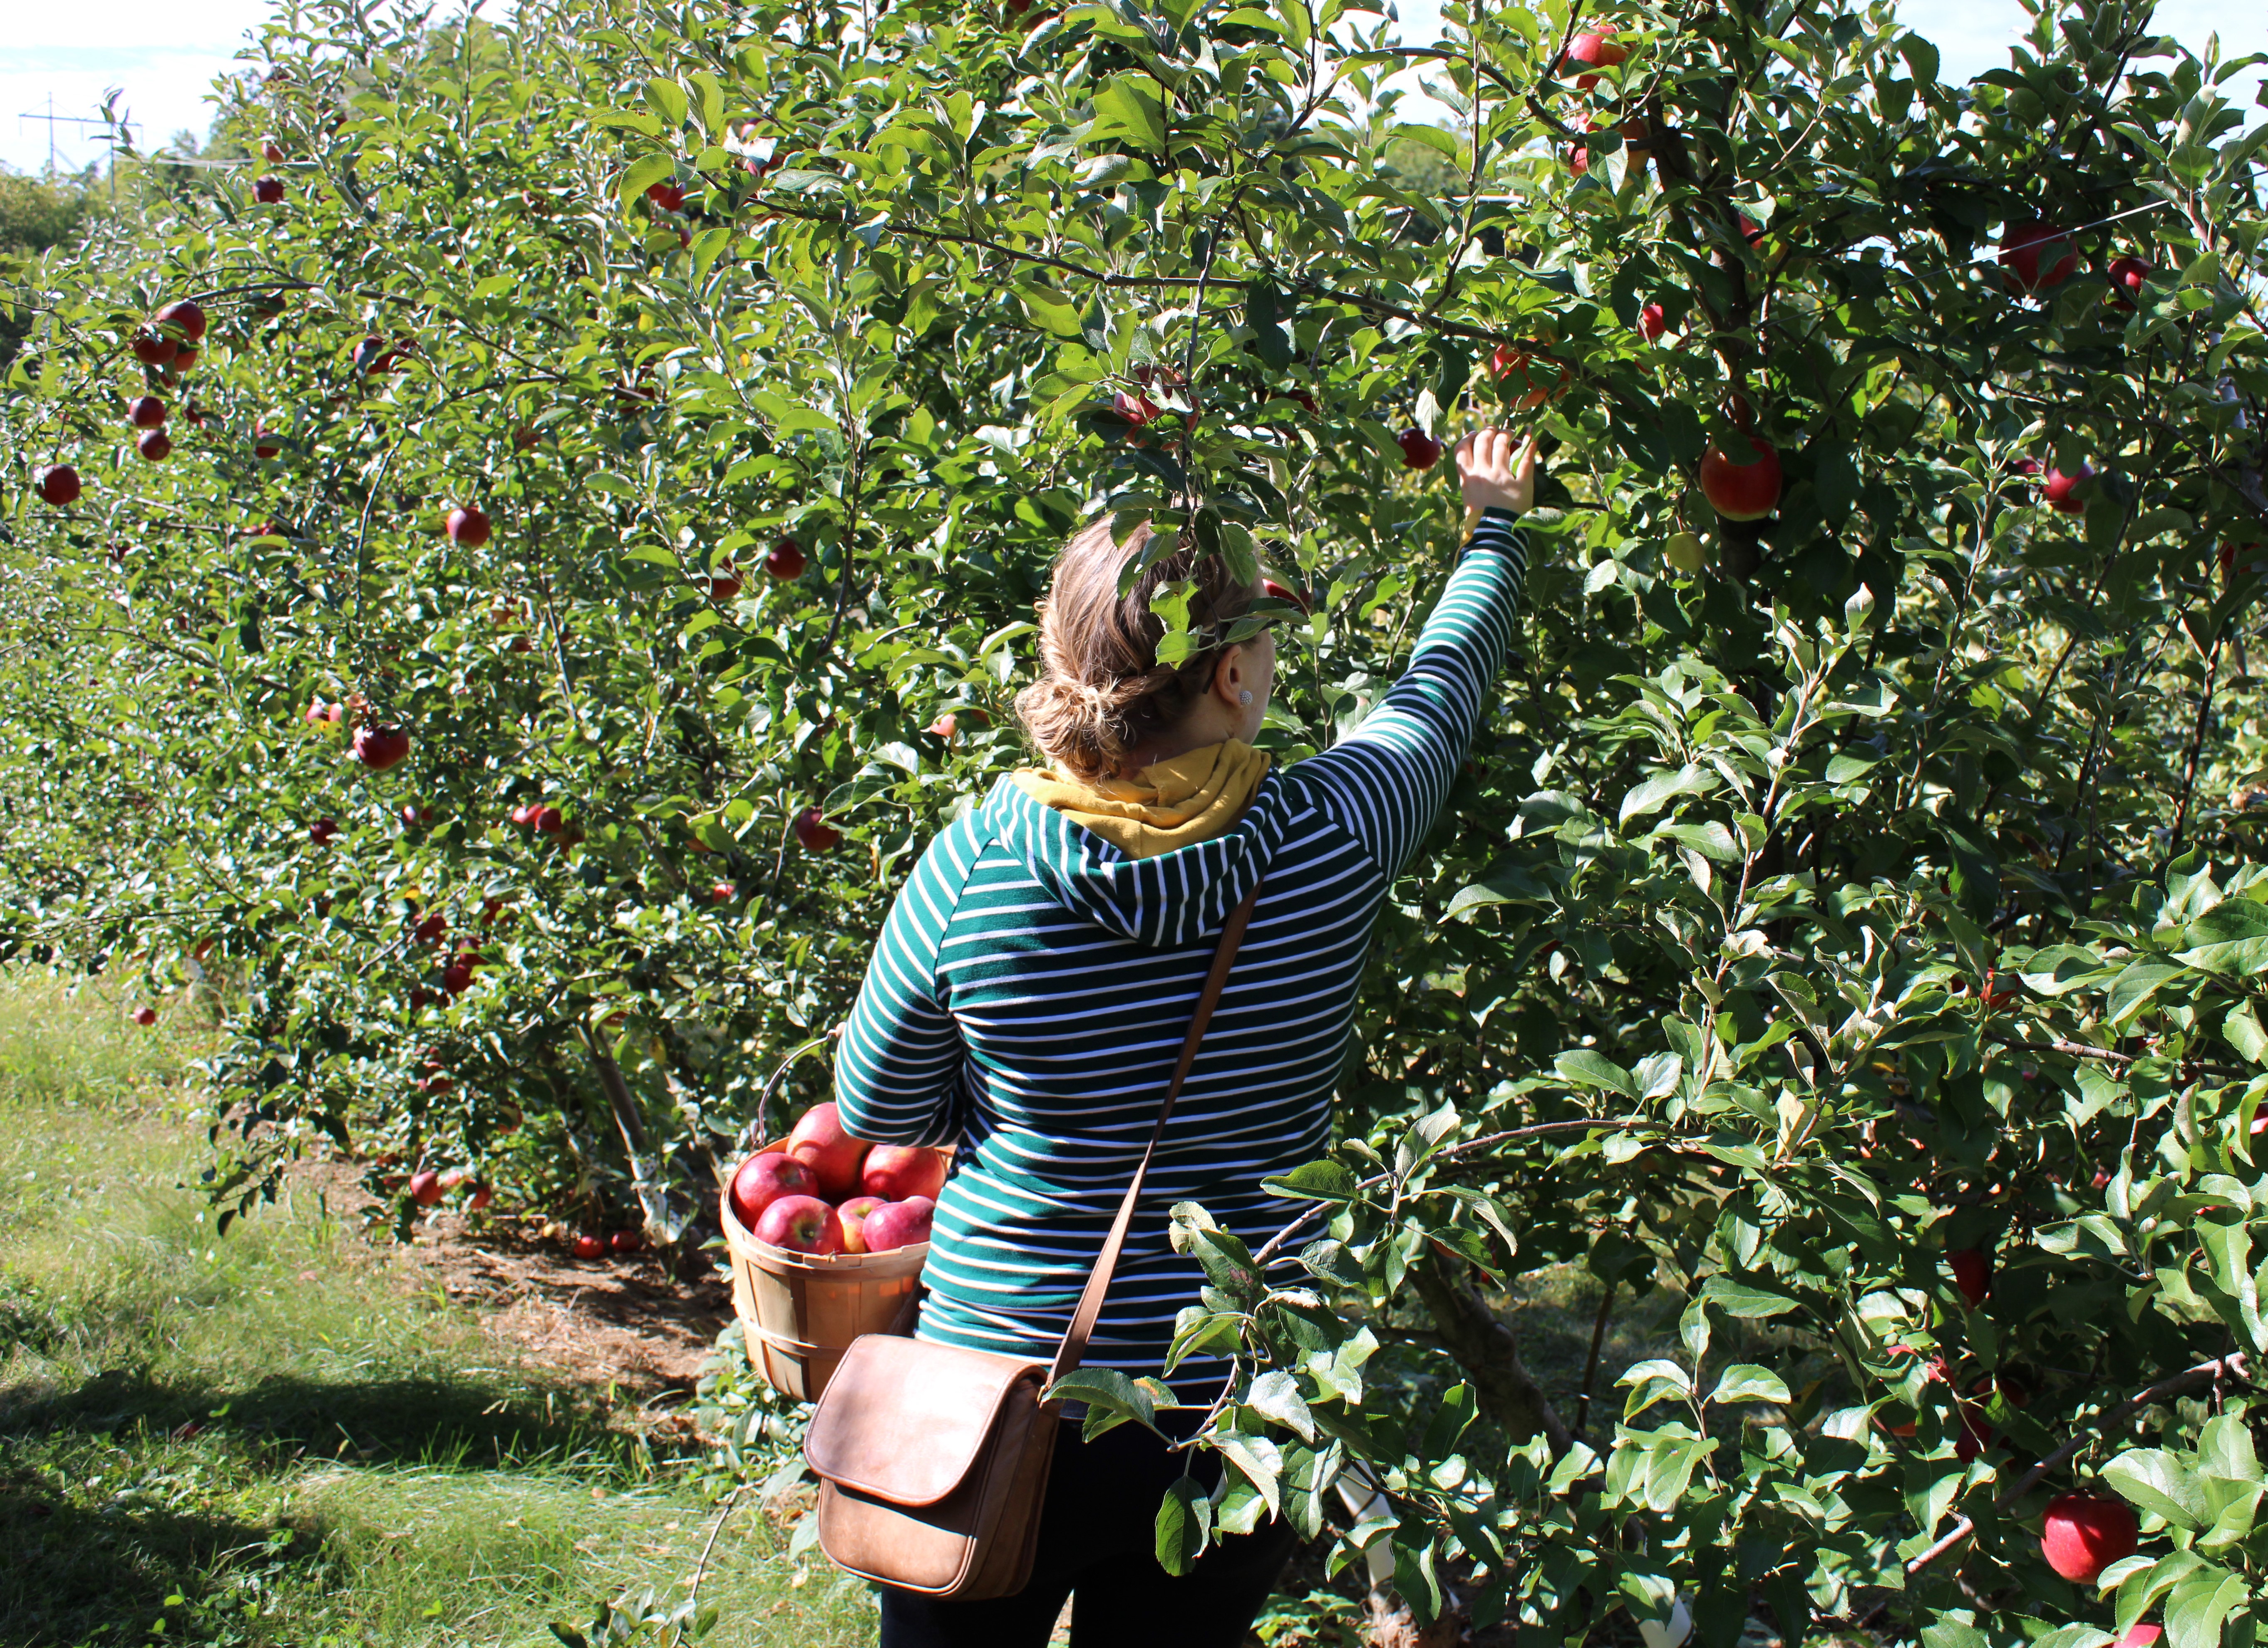 Hannah picking just one more apple to add to her full basket